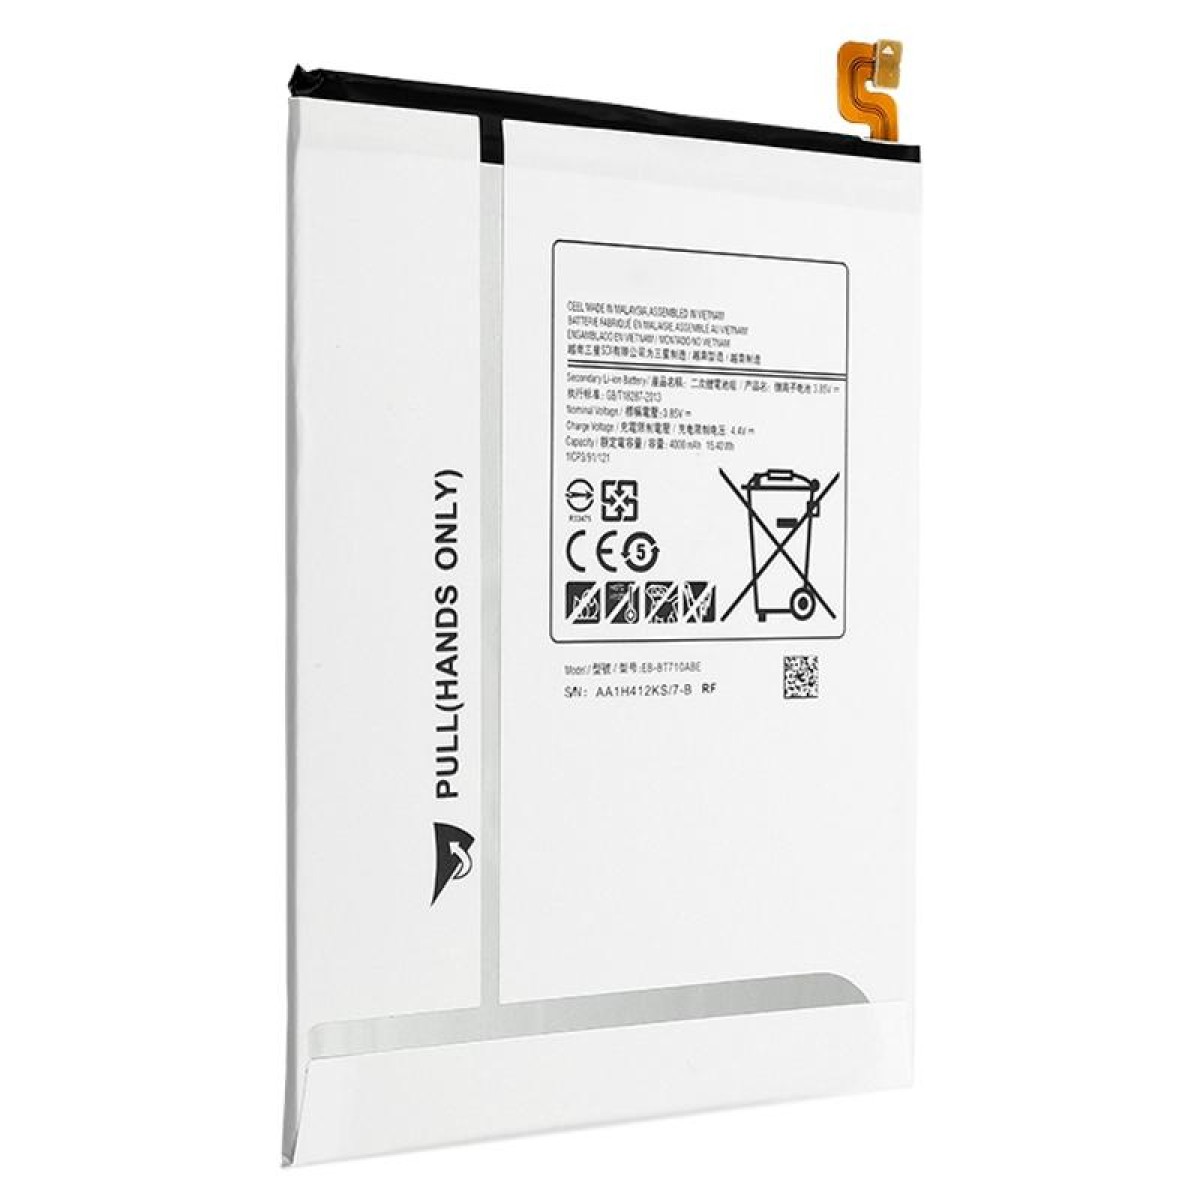 EB-BT710ABE For Samsung Galaxy Tab S2 8.0 SM-T710 Li-Polymer Battery Replacement